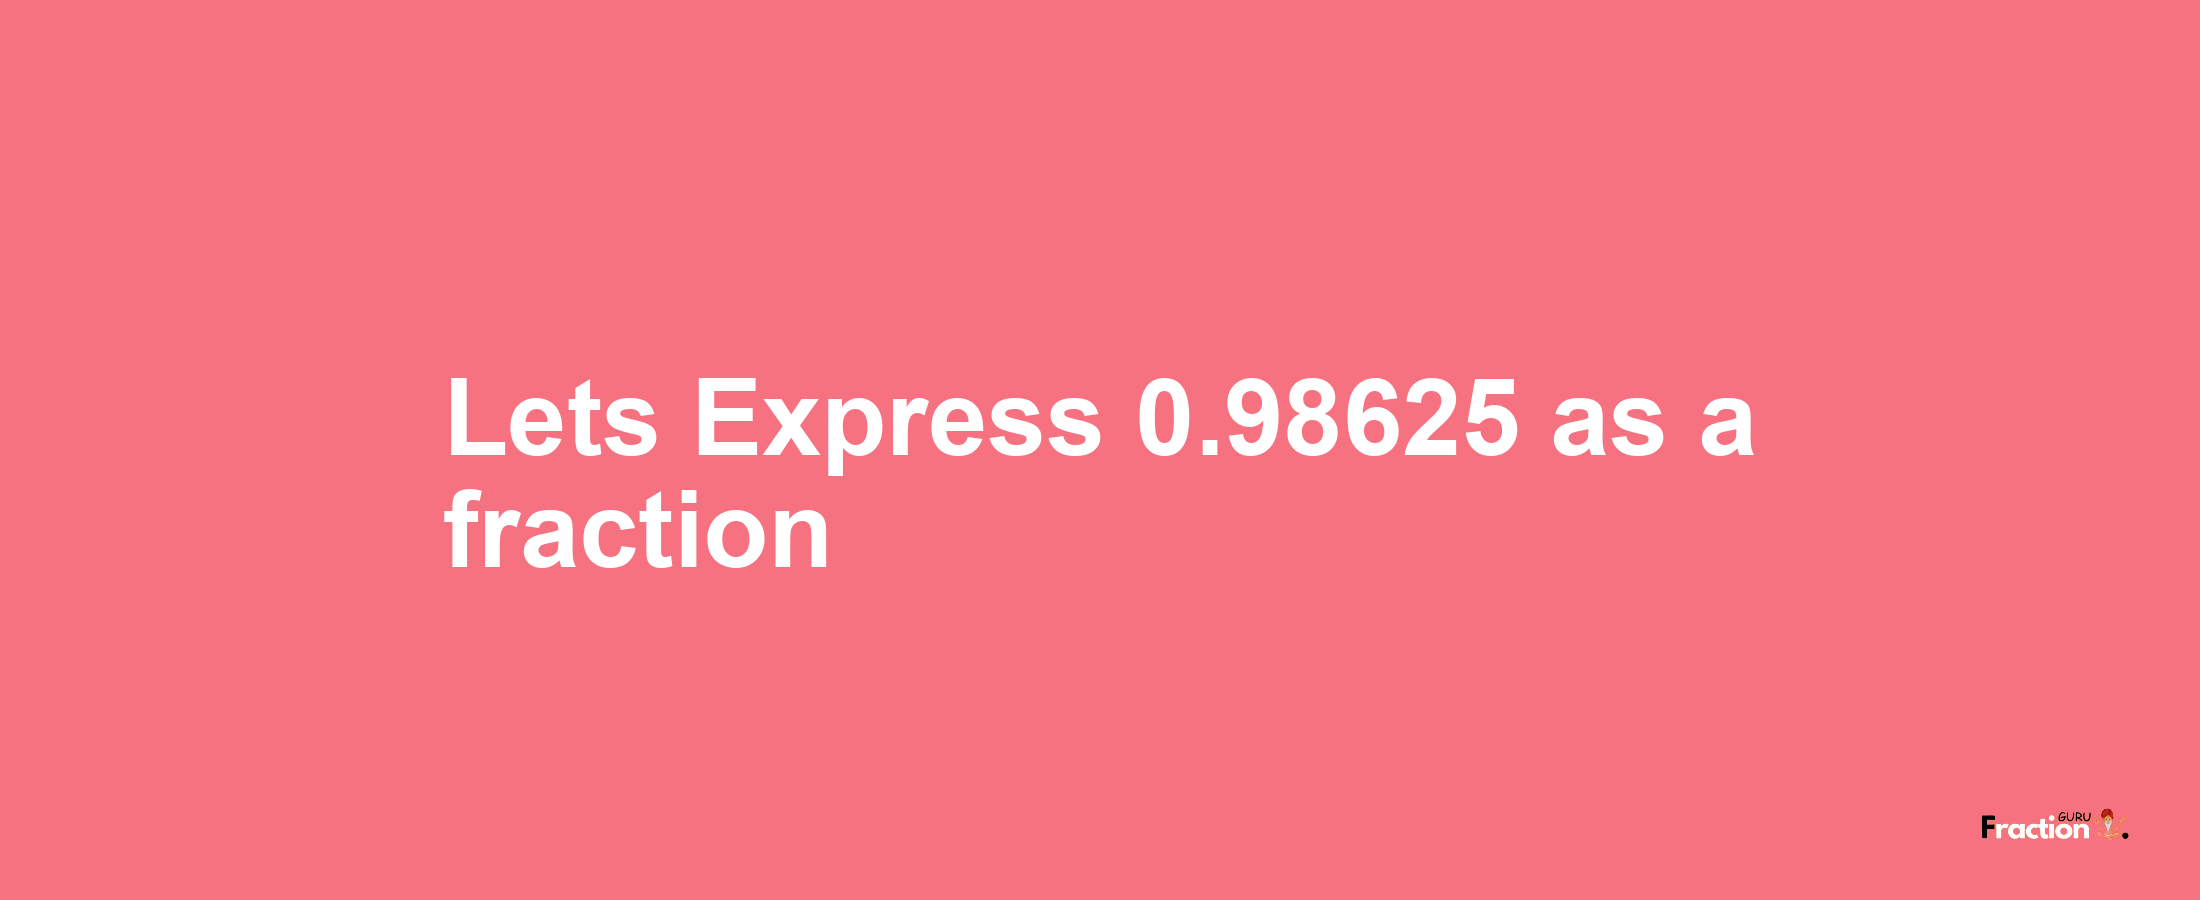 Lets Express 0.98625 as afraction